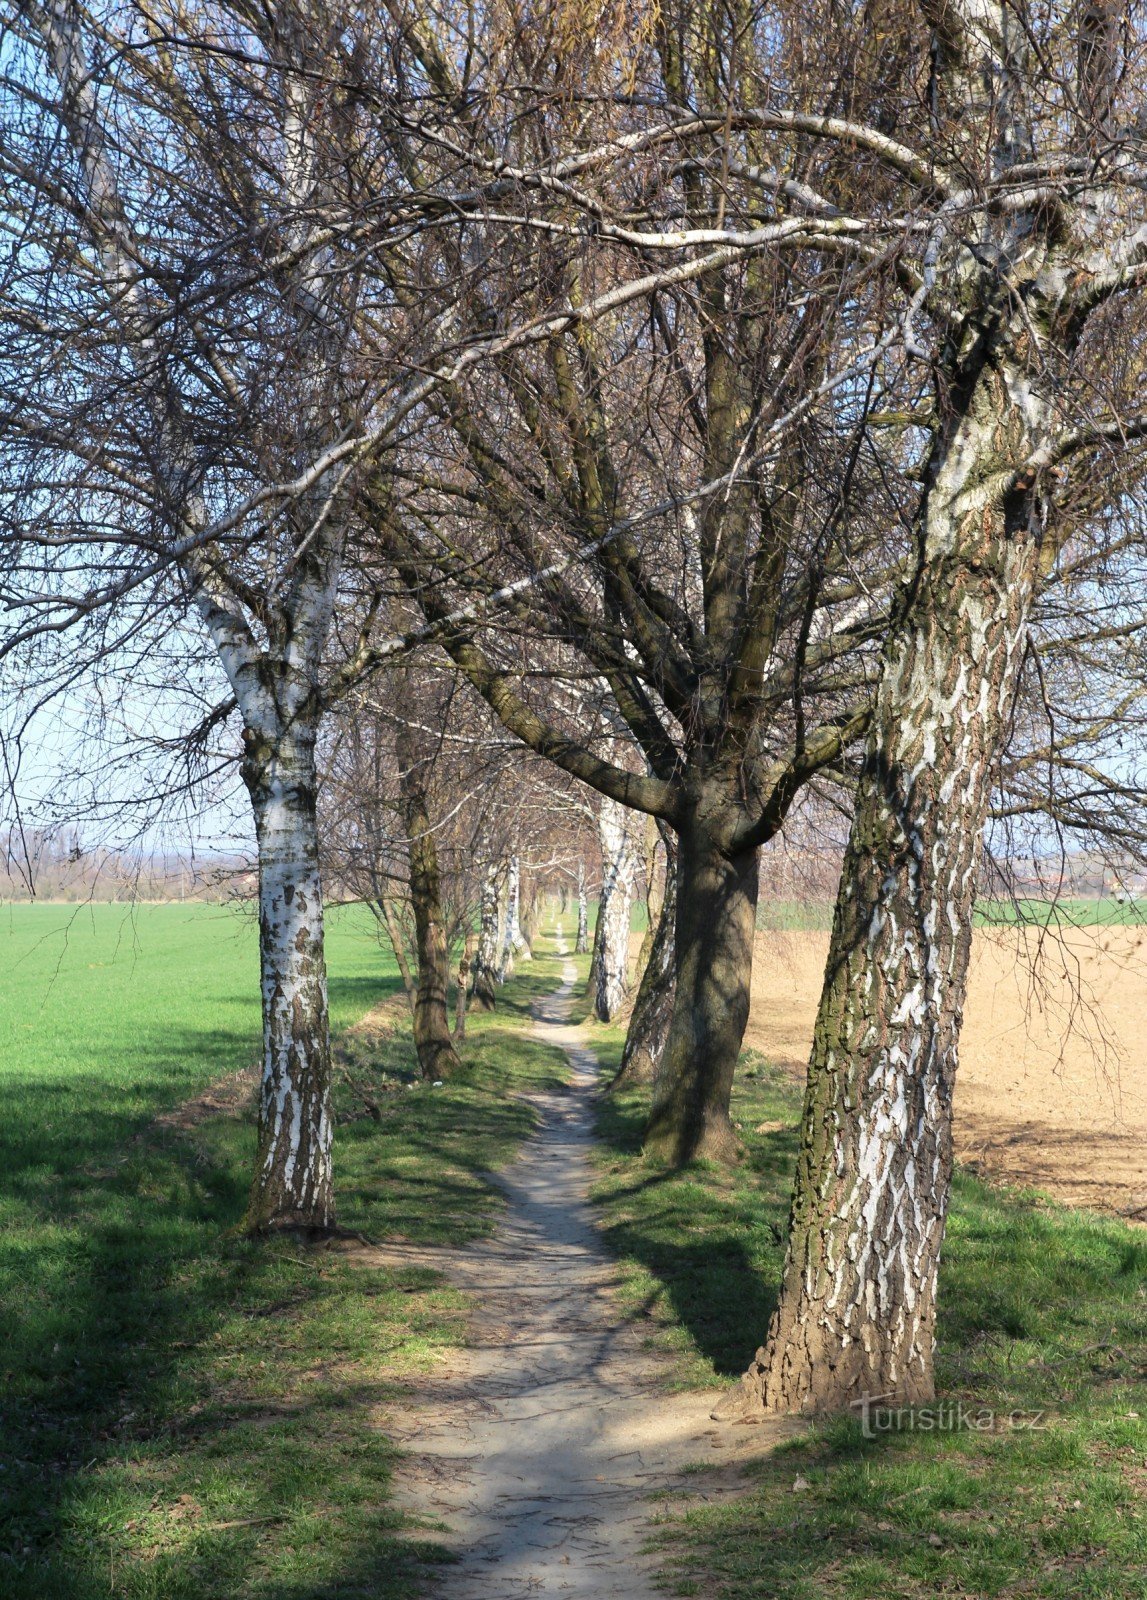 The current Holasická cesta has more the character of a pedestrian path